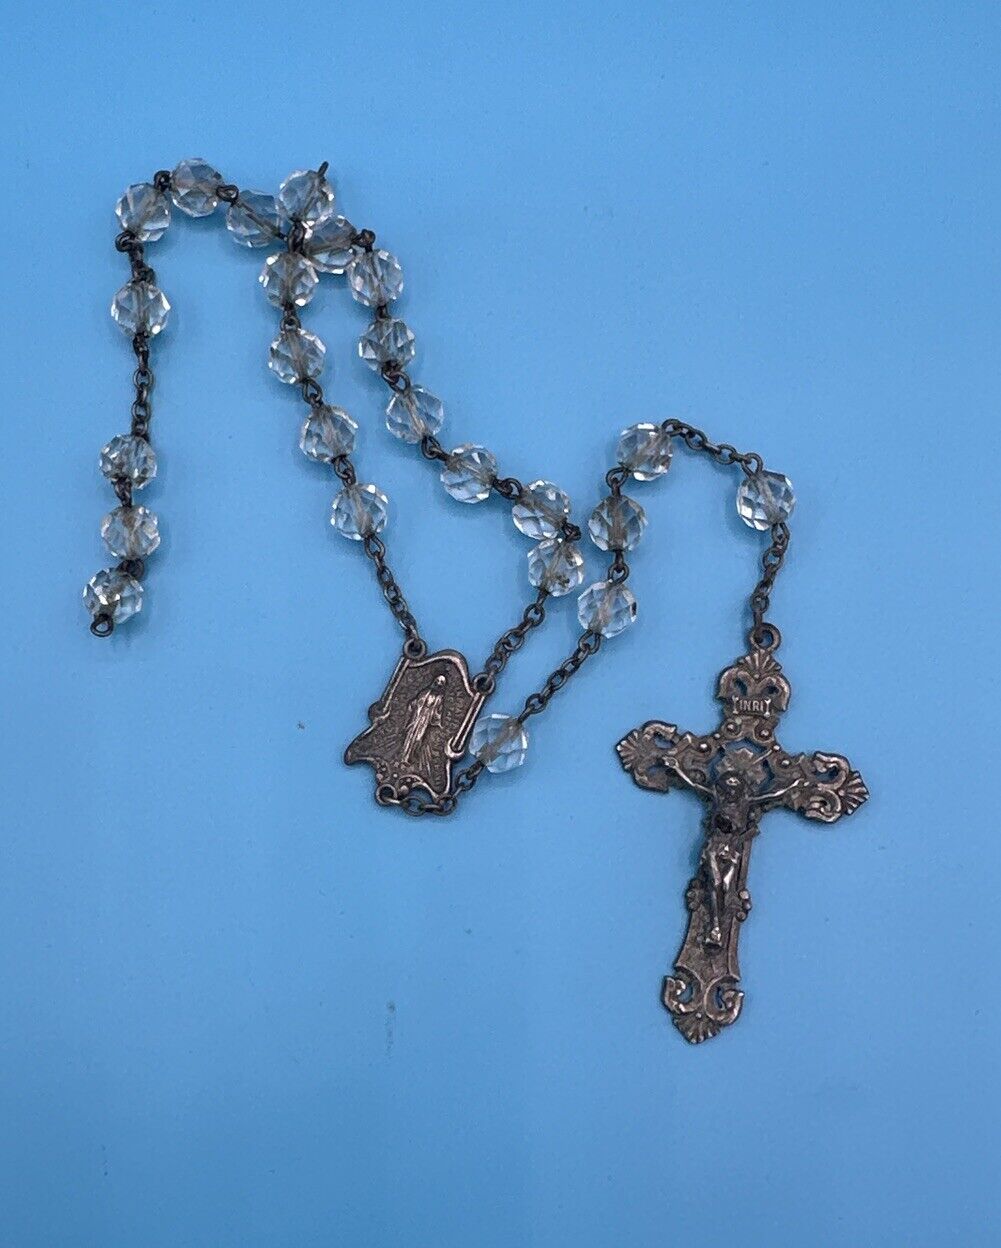 Vintage Sterling Silver 925 Crucifix by DiROMA - Needs Beads Replaced